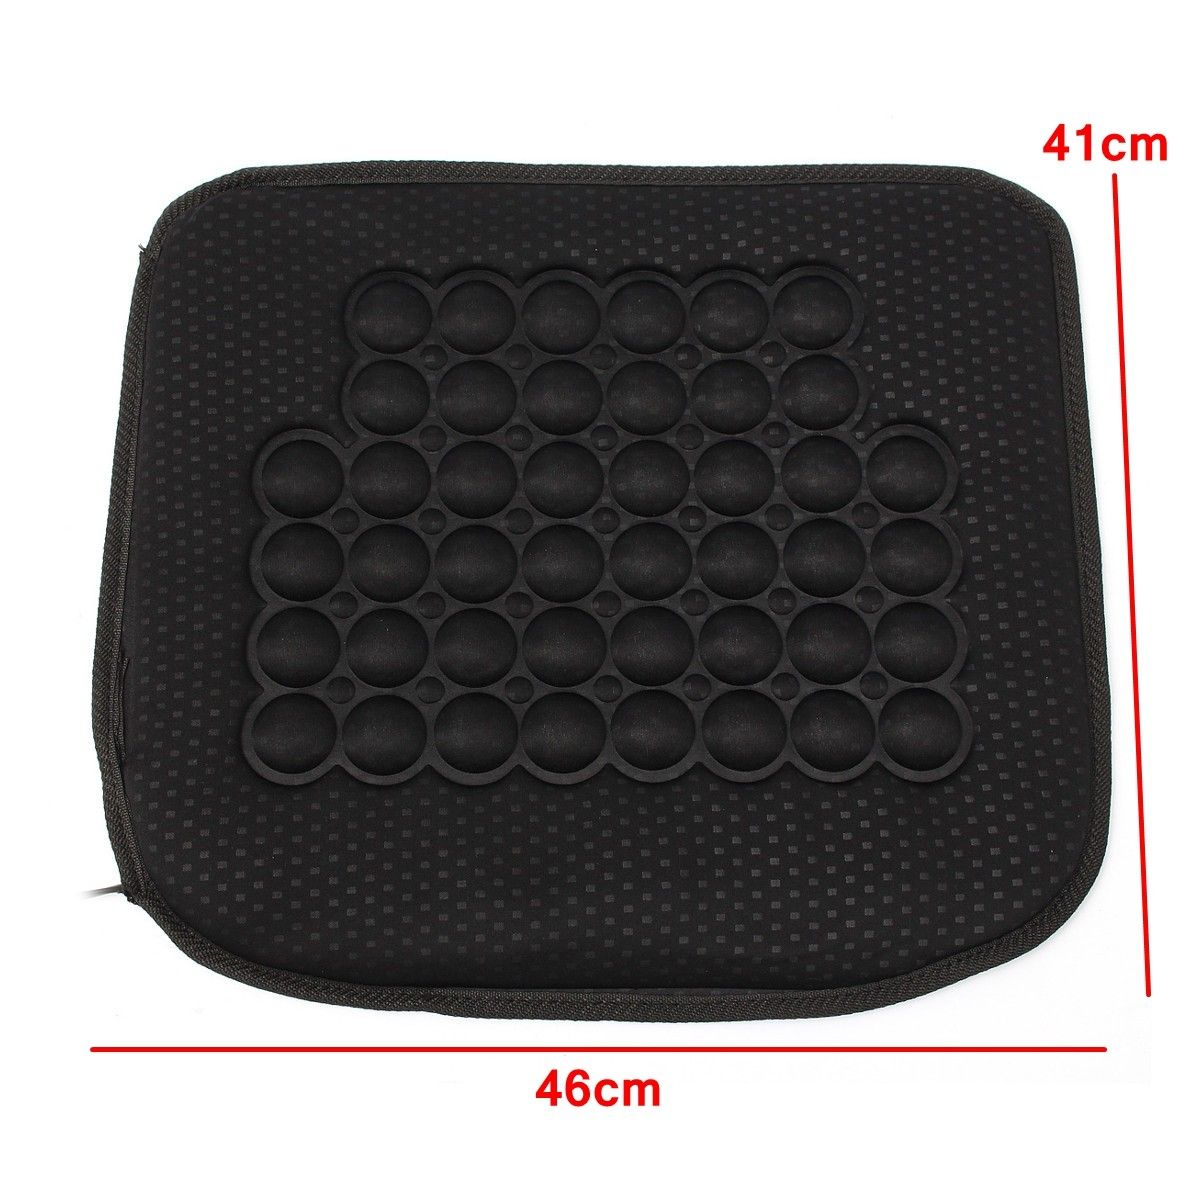 Universal-12V-Electric-Car-Front-Seat-Heating-Cushion-Thermal-Pad-Warmer-Cover-1596216